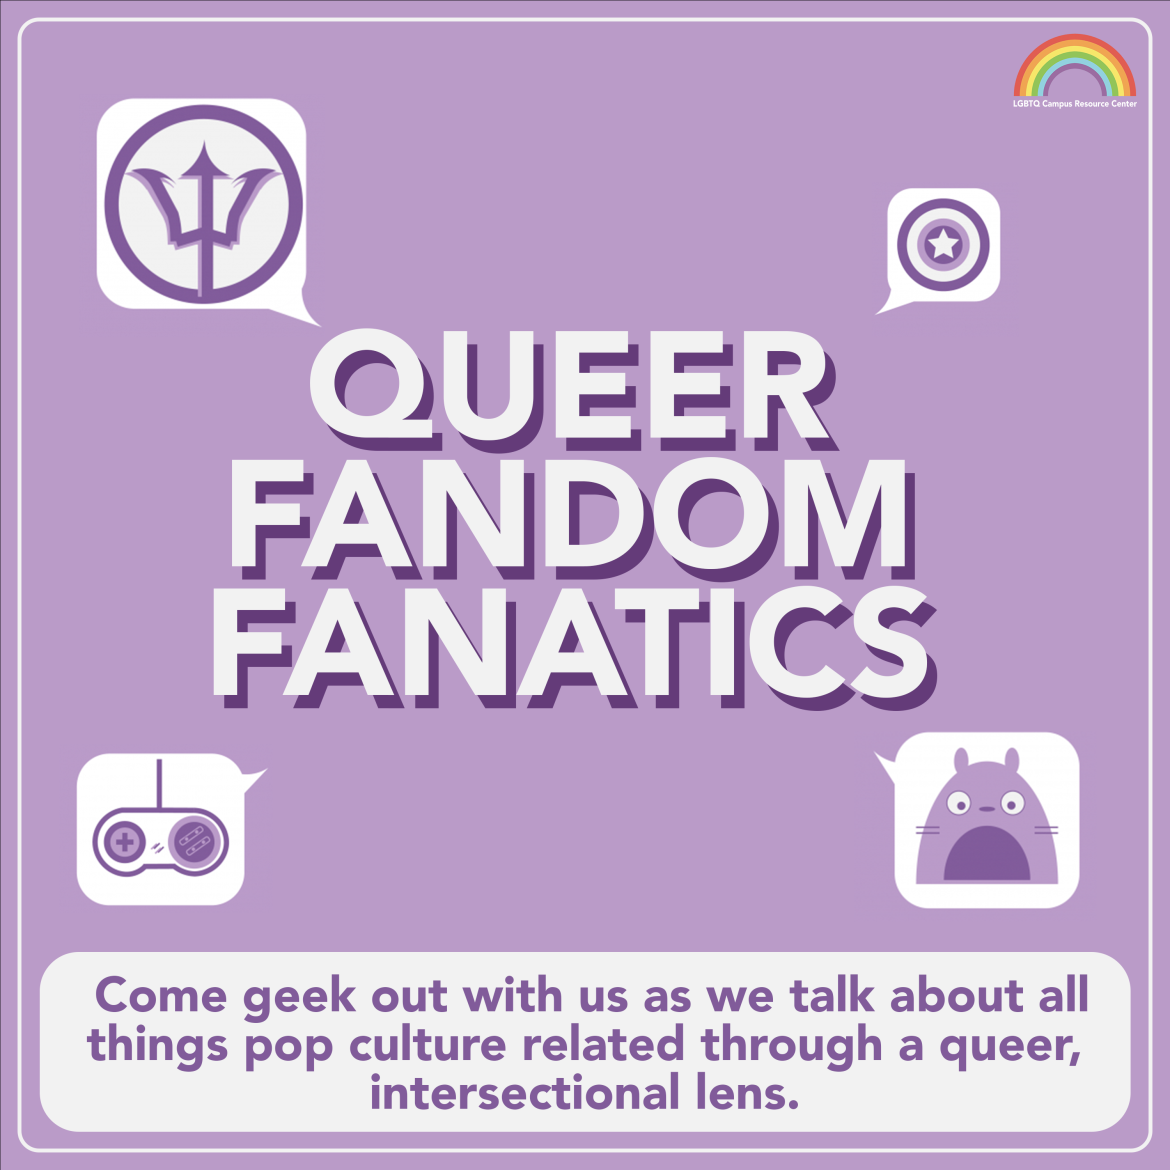 [The weekly space, “Queer Fandom Fanatics” is at the center in bold, all-caps text with a purple shadow. At the corners of the text are speech bubbles with symbols in them, including a trident, Captain America’s shield, a video game controller, and a cute animal. The text underneath, in purple on a white background, reads, “Come geek out with us as we talk about all things pop-culture related through a queer, intersectional lens. The background is light purple.